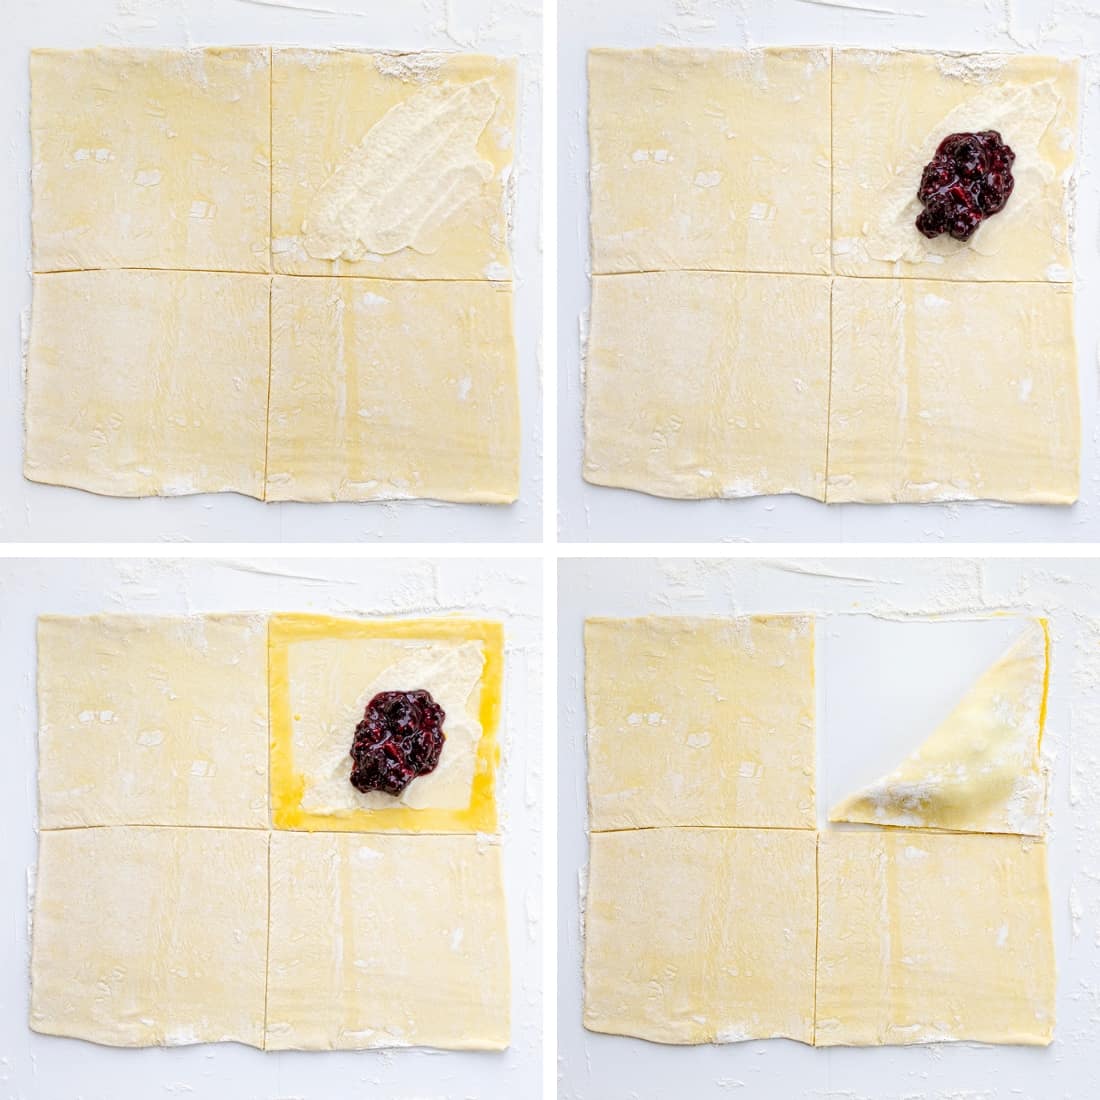 Steps for How to Make a Blackberry Cream Cheese Turnovers with Puff Pastry.